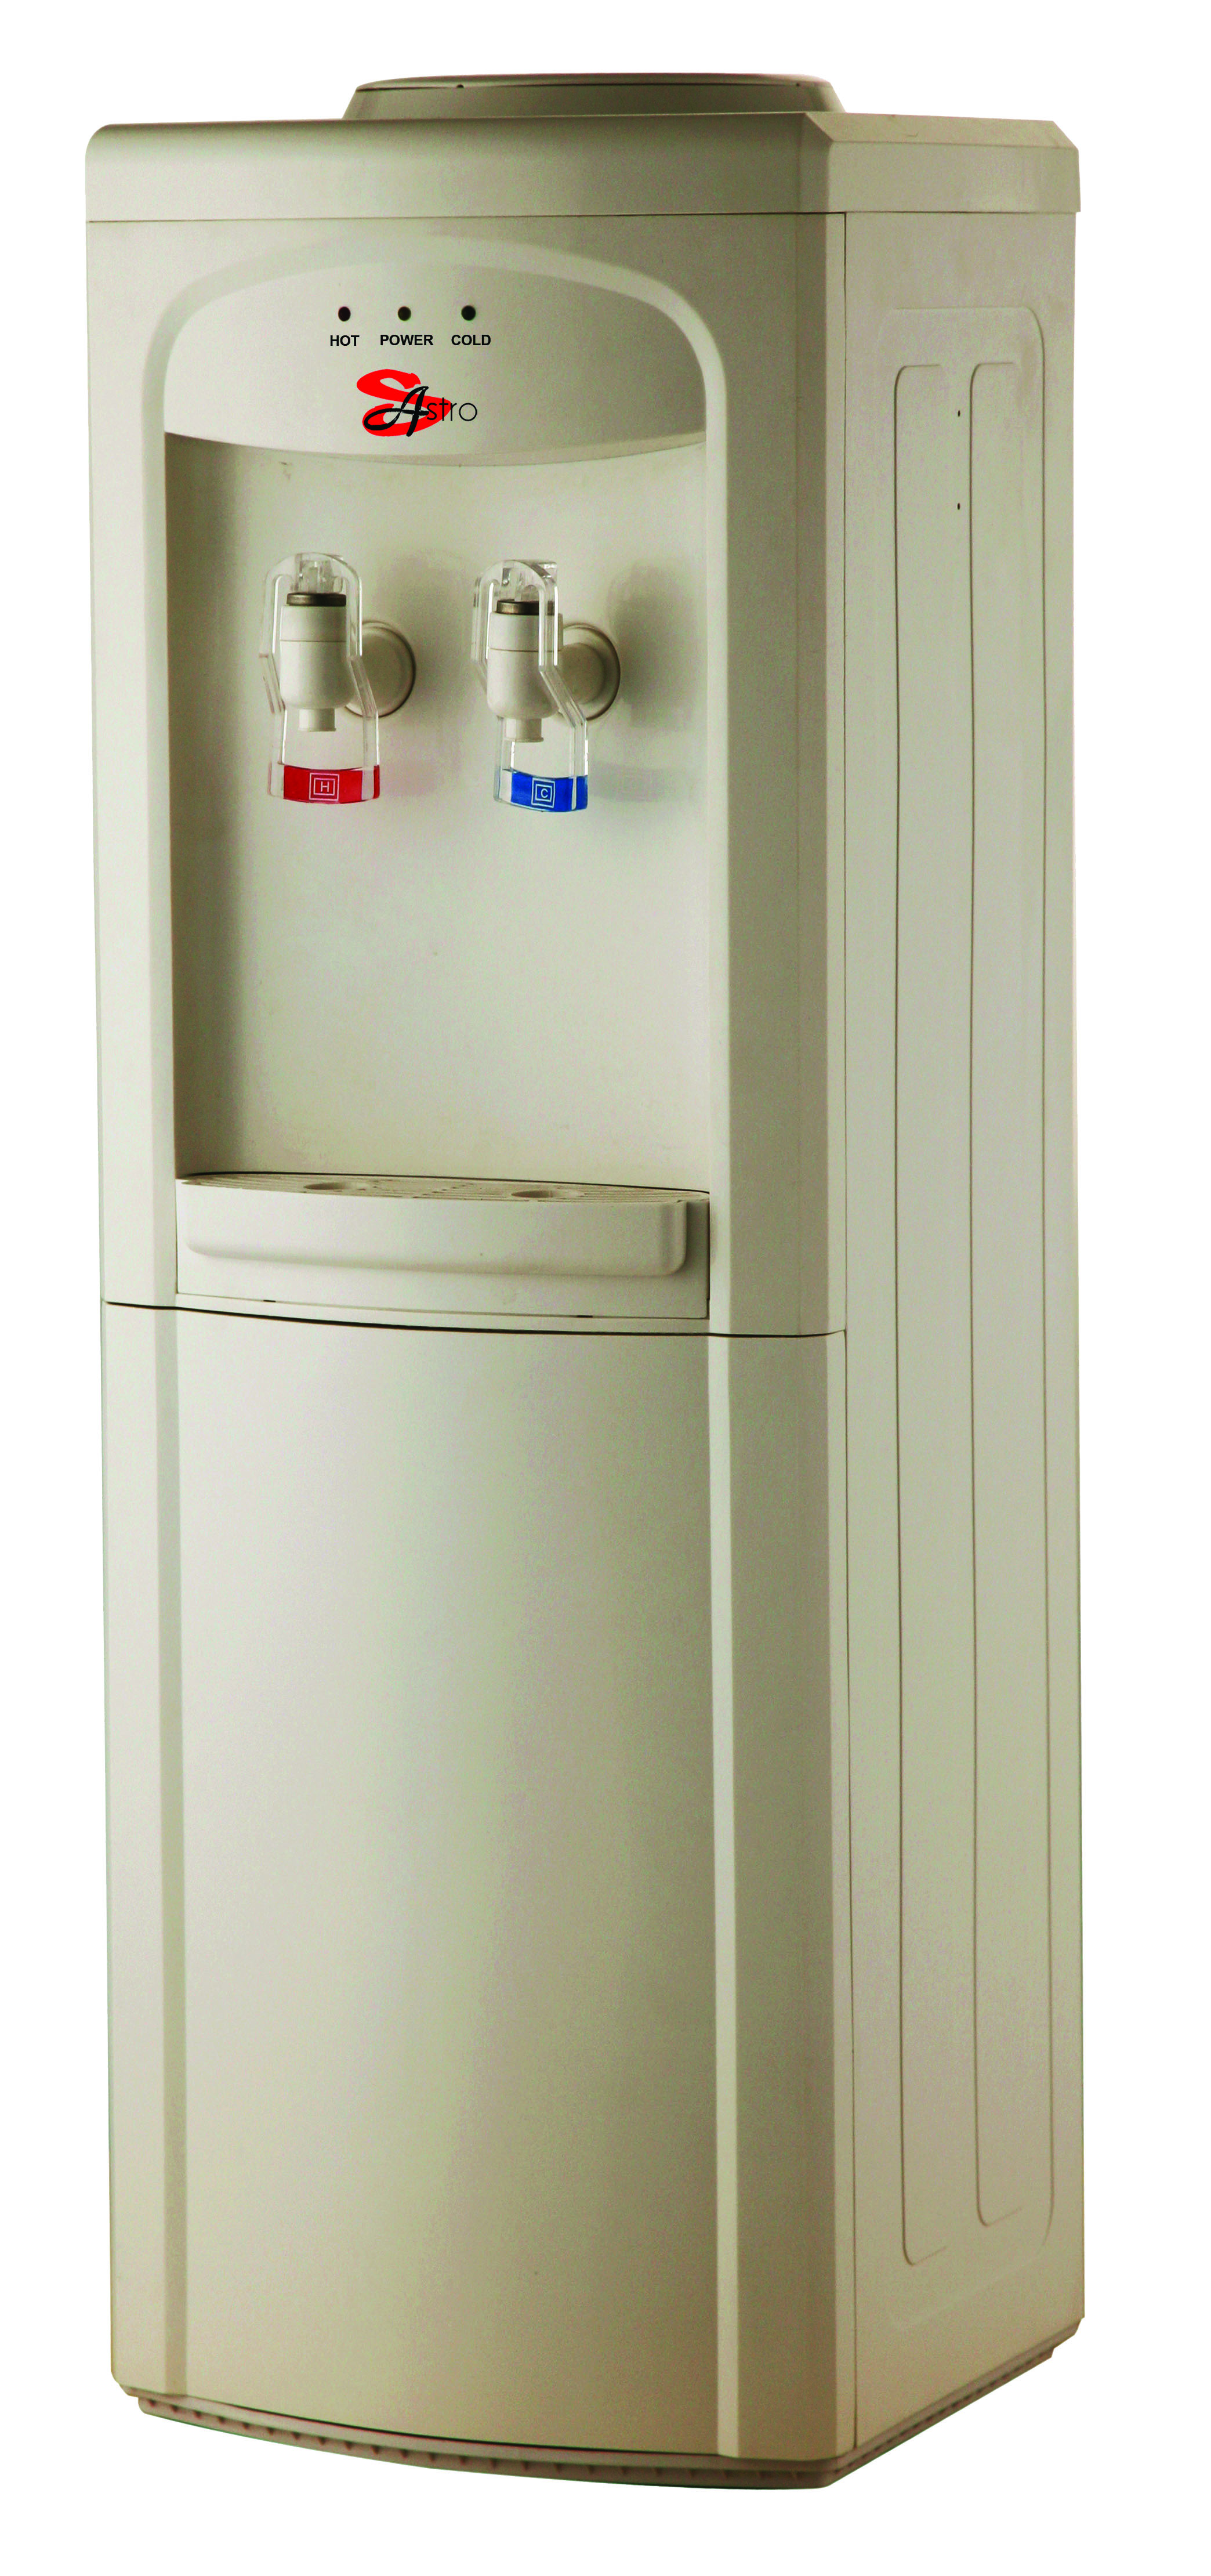 SASTRO SH-001AS STAND WATER DISPENSER SILVER